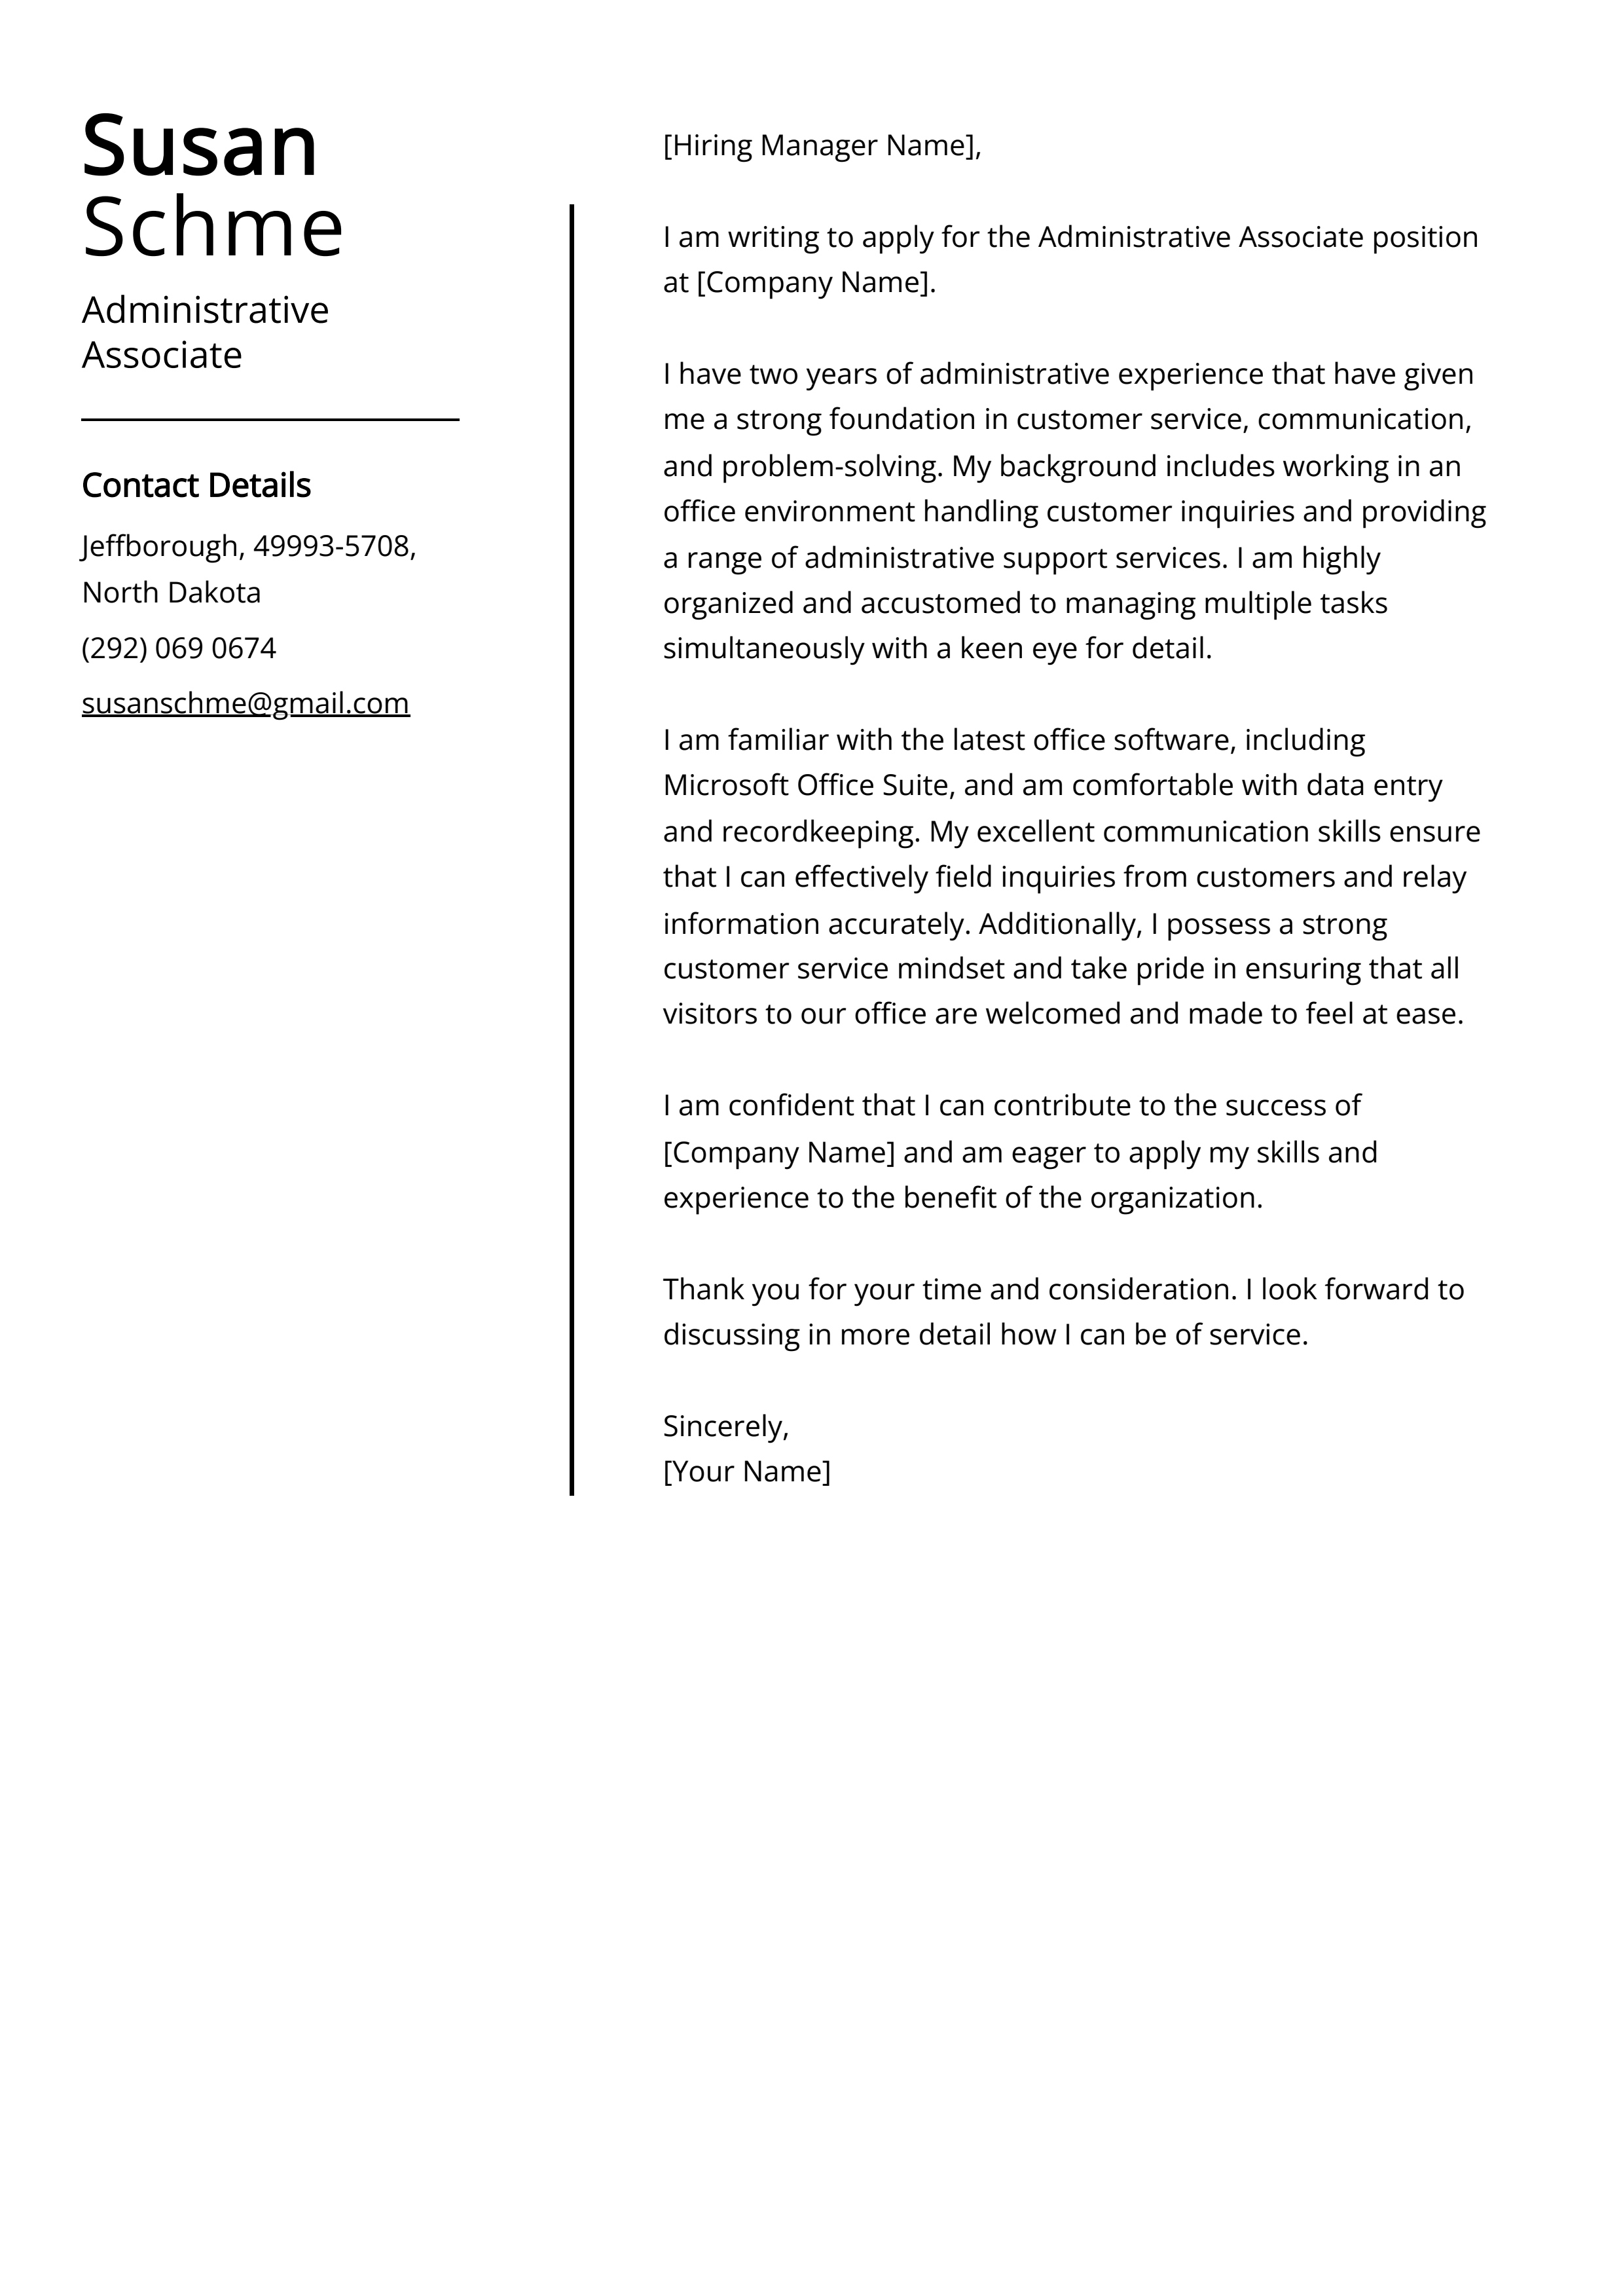 Administrative Associate Cover Letter Example